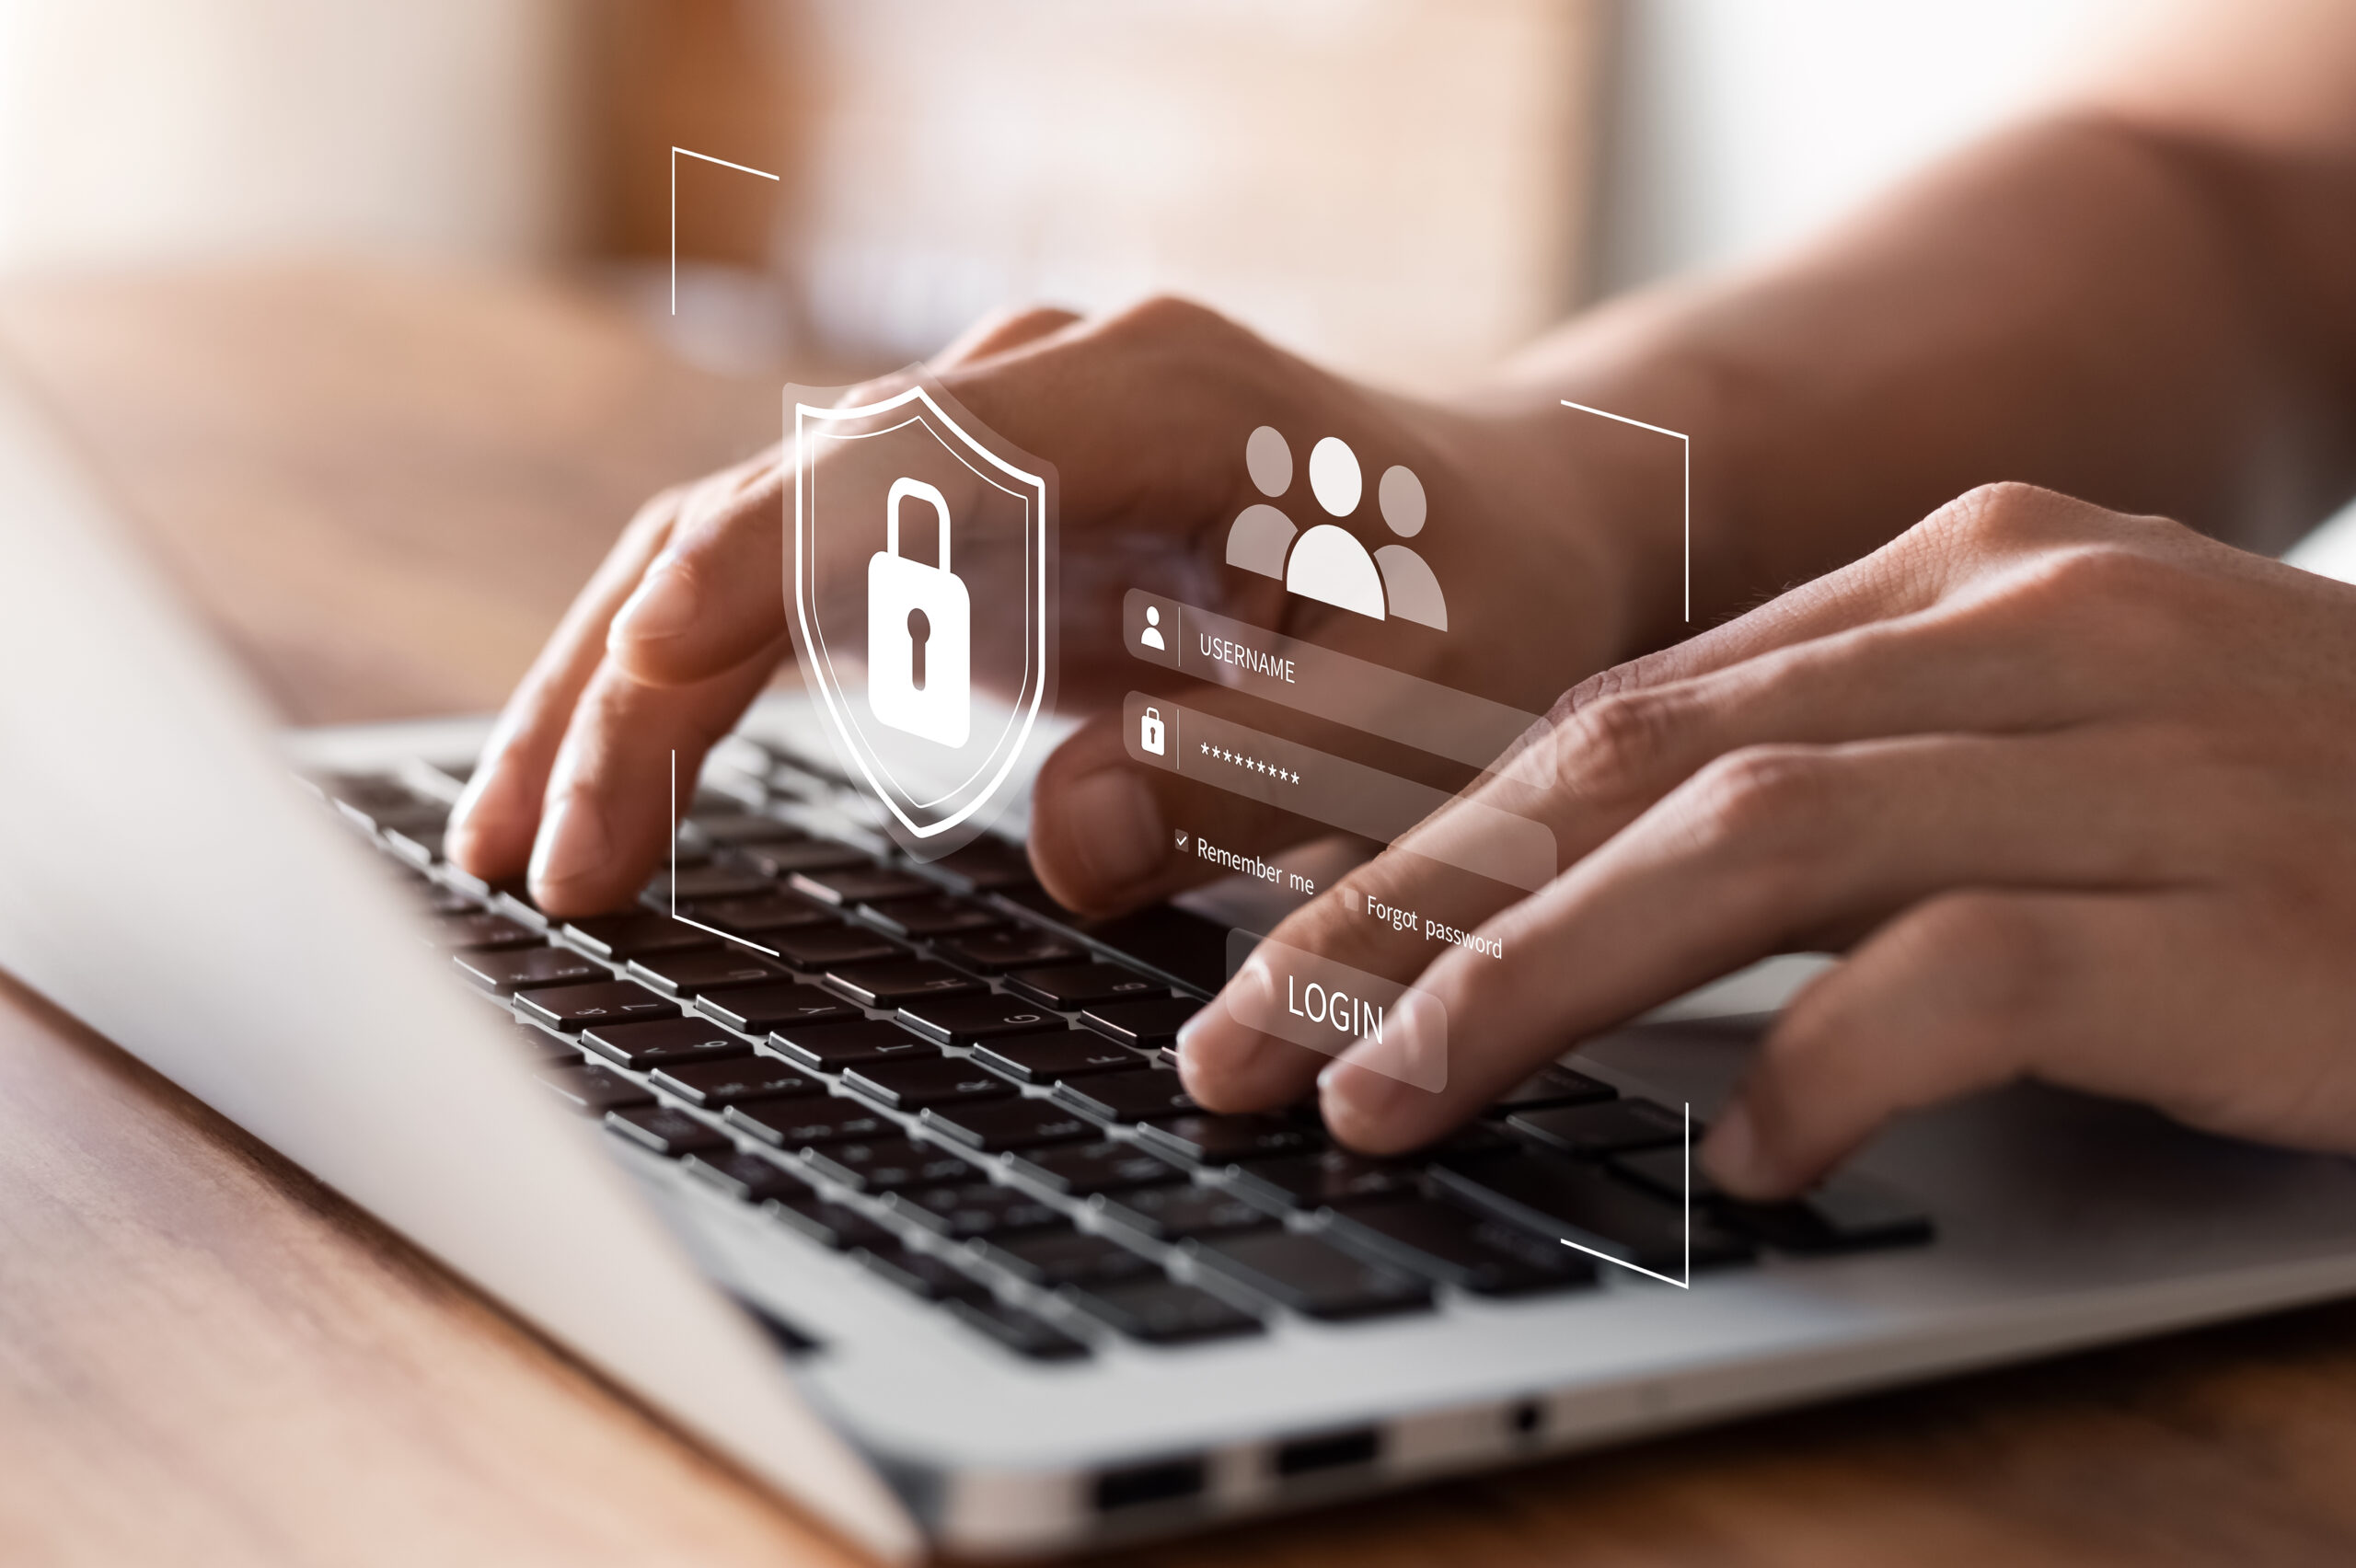 Ensure Internet Privacy and build trust with customers